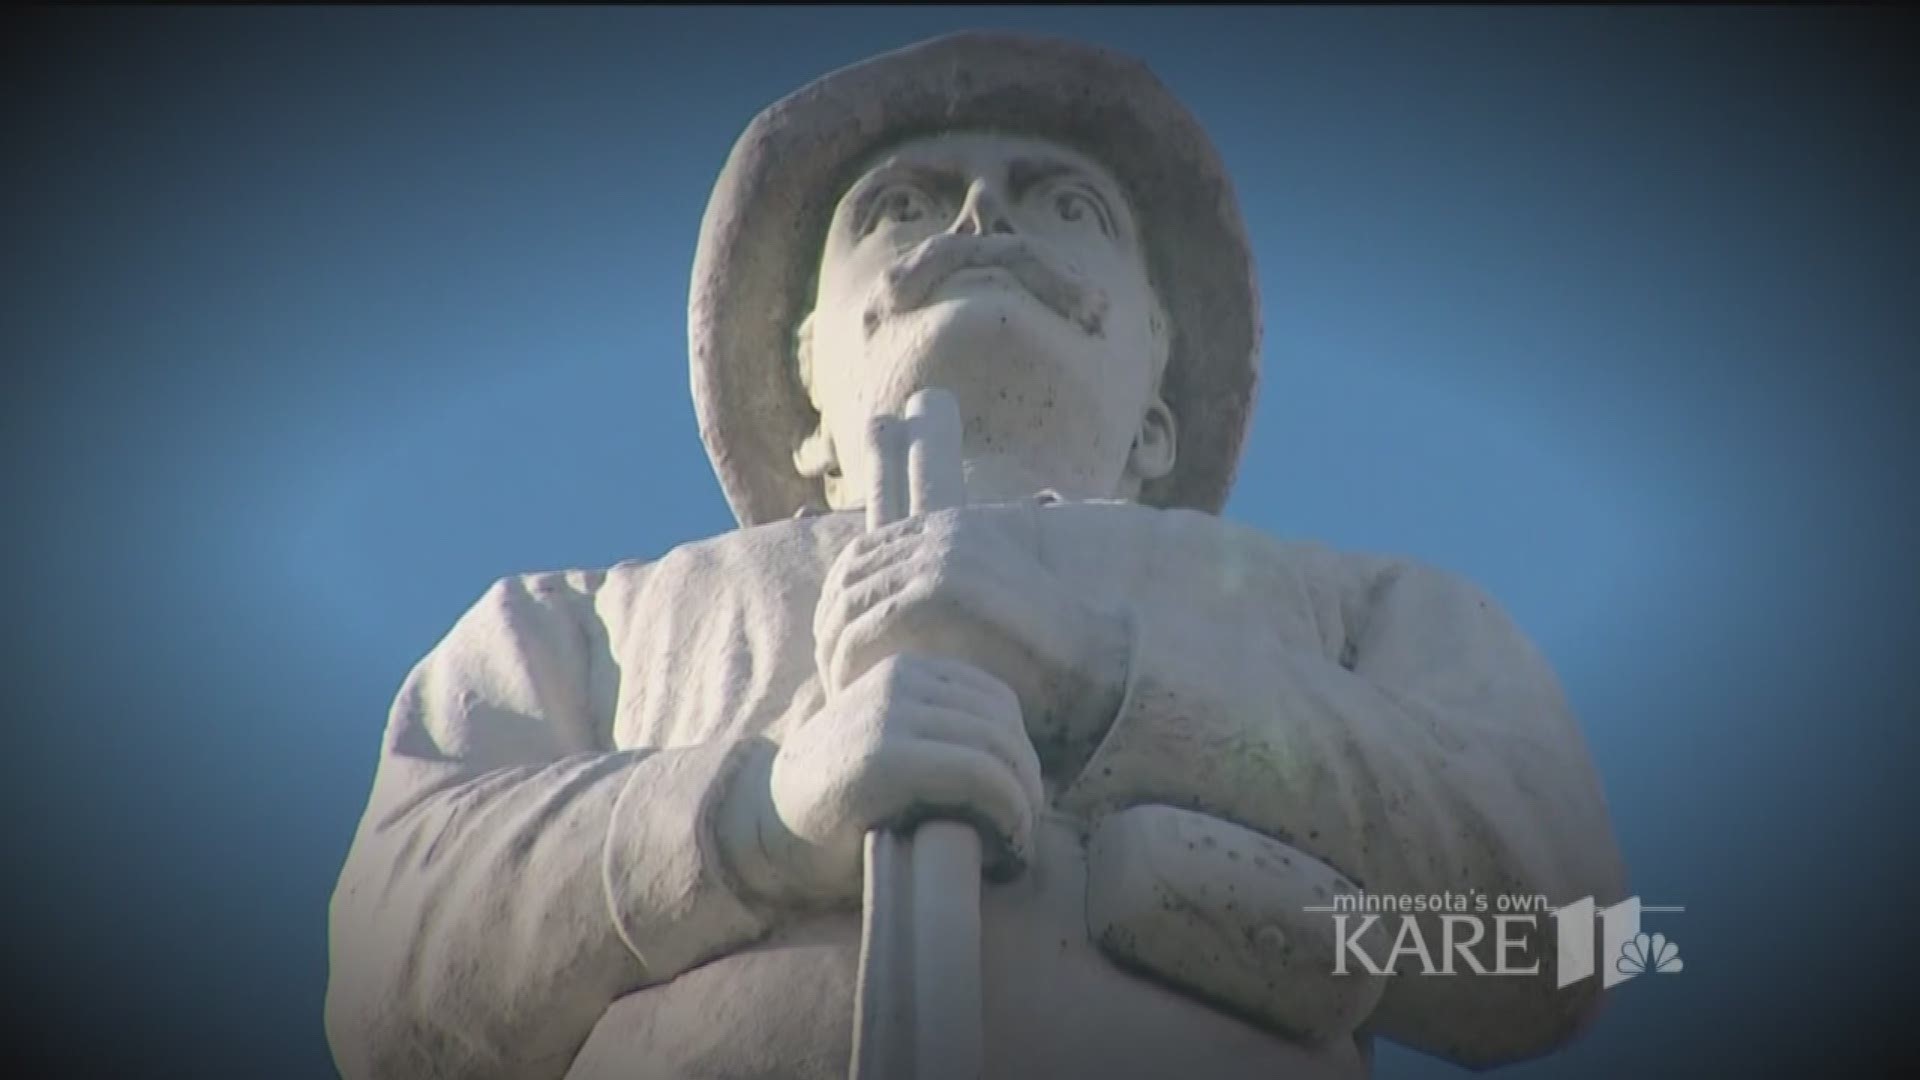 As the city of Baltimore took down Confederate monuments overnight, a long standing debate of history versus hate surges again: should the markers of the Confederacy stand as symbols of heritage, or topple as an immortalized reminder of hate? http://kare1